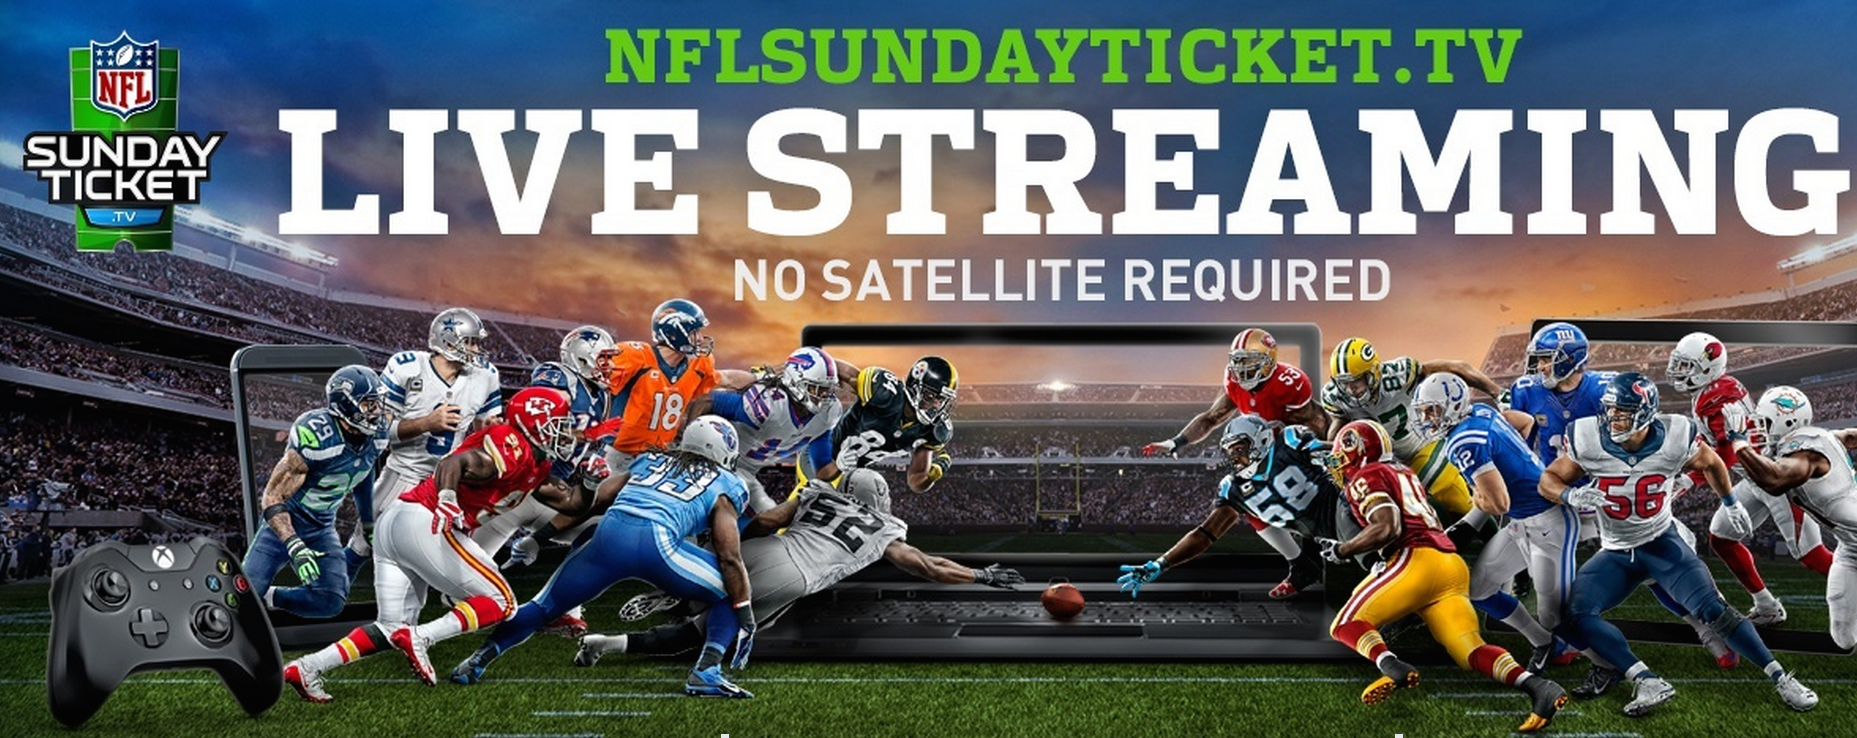 NFL Sunday Ticket Now Available To College Students At A Discount